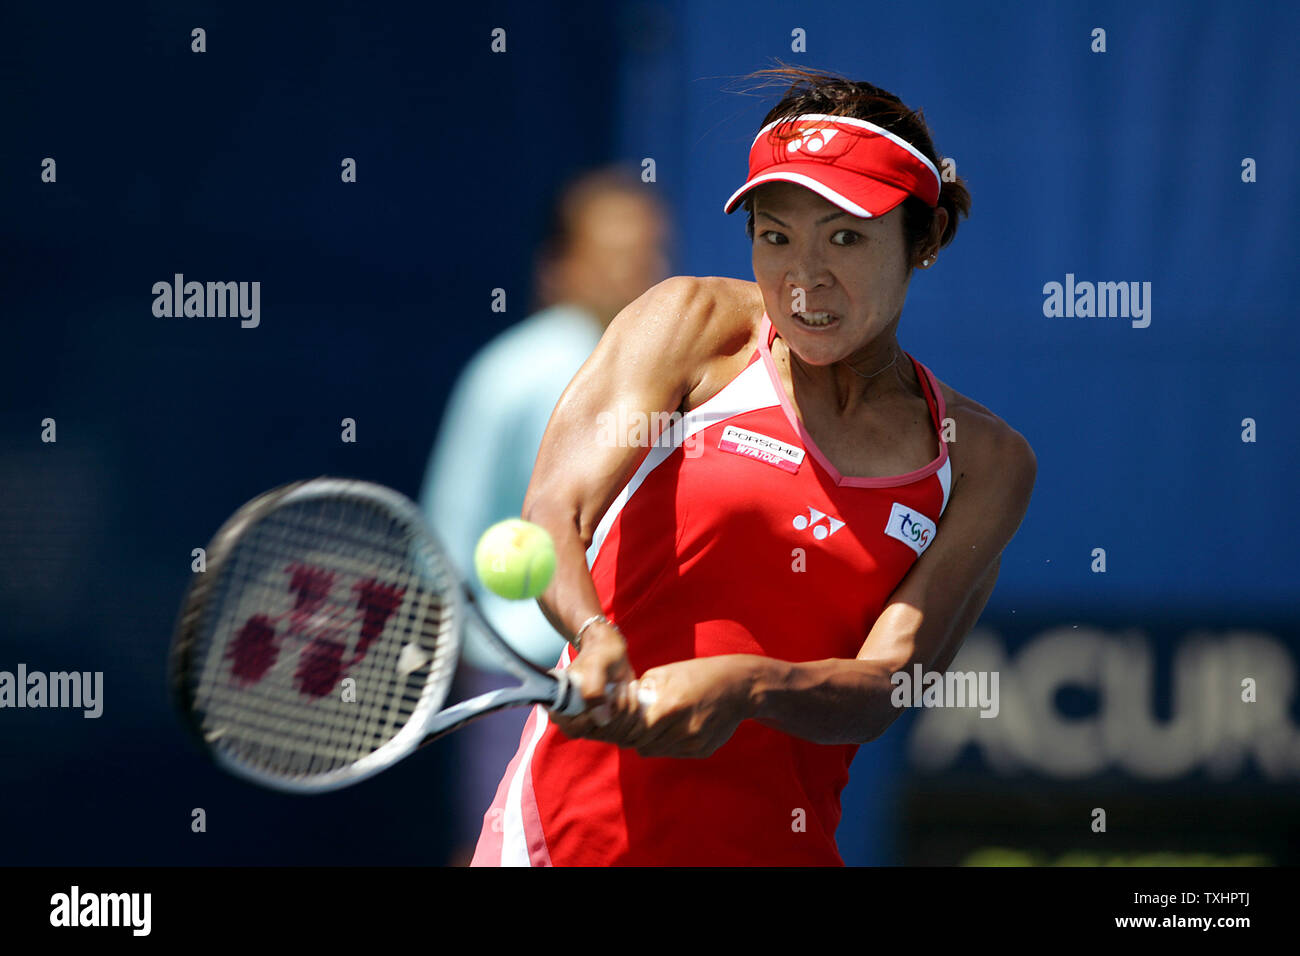 Saori Obata of Japan wins over Varvara Lepchenko of Uzbekistan (6-2 3-6  6-2) in a first day qualifying match at the Acura Classic women's tennis  tournament in Carlsbad, California on July 30,